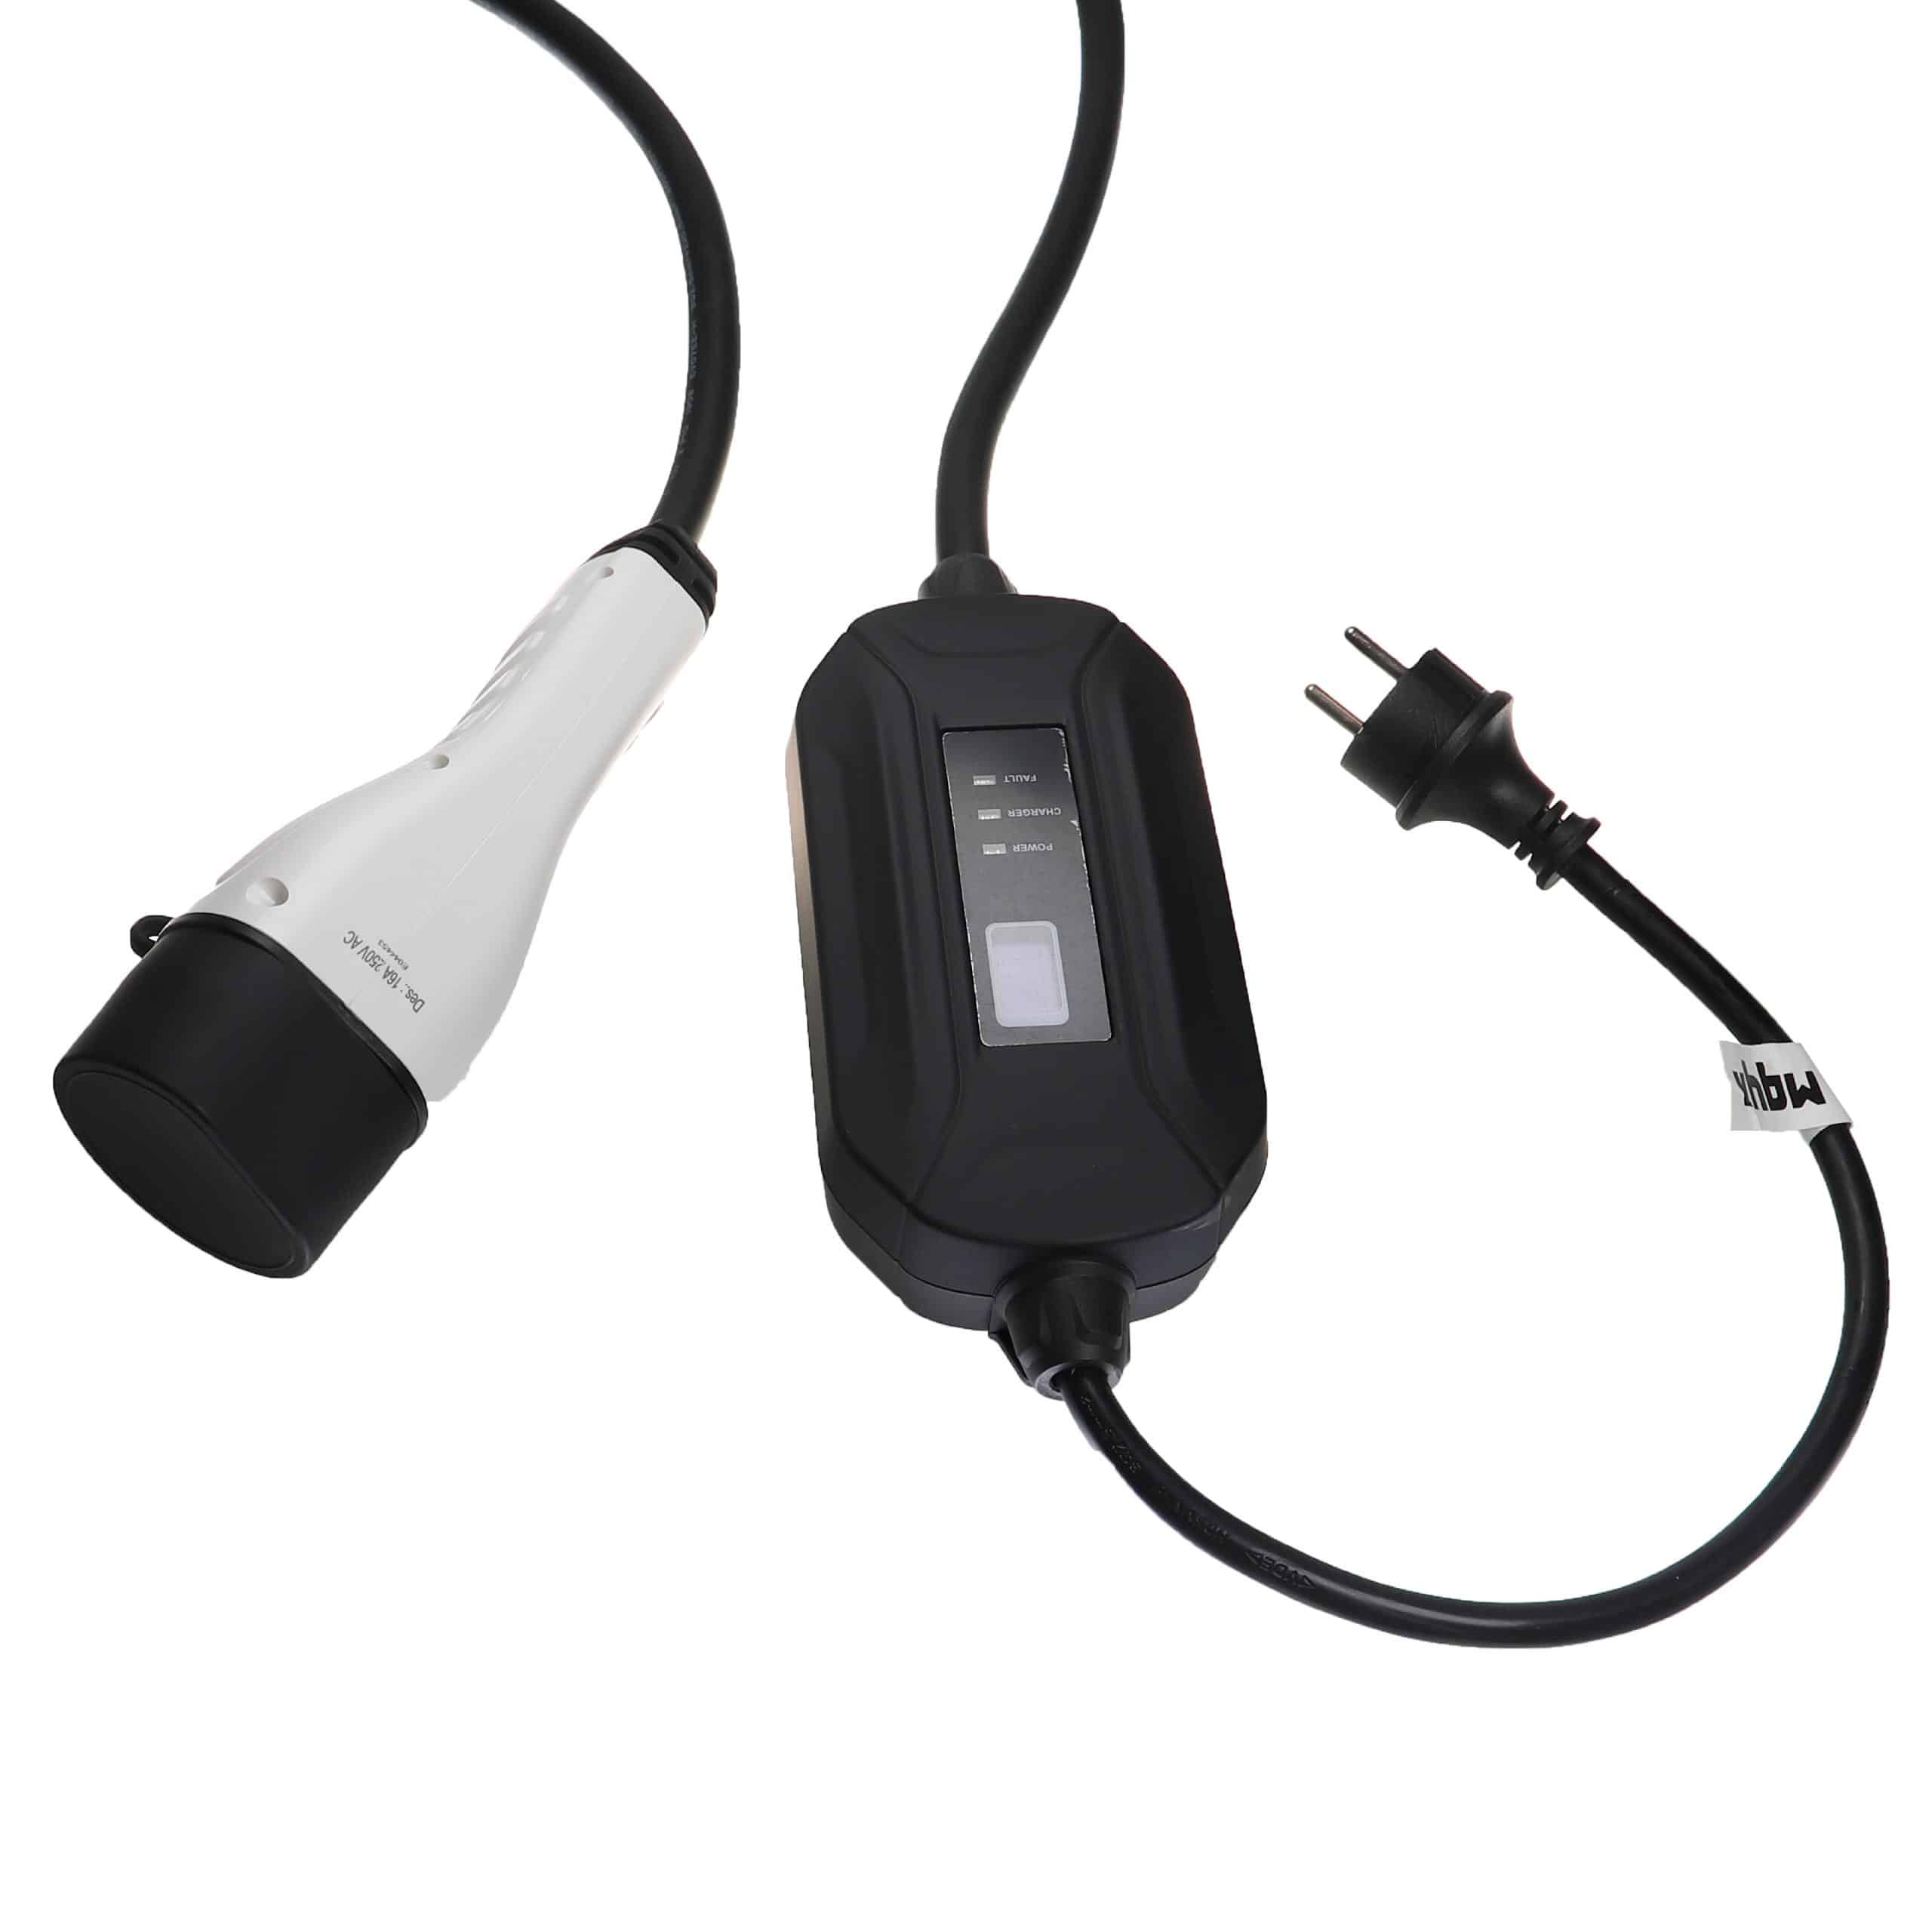 Charging Cable for Electric Car, Plug-In Hybrid - Type 2 to Euro Socket Cable, Single-Phase, 16 A, 3.5 kW, 7 m